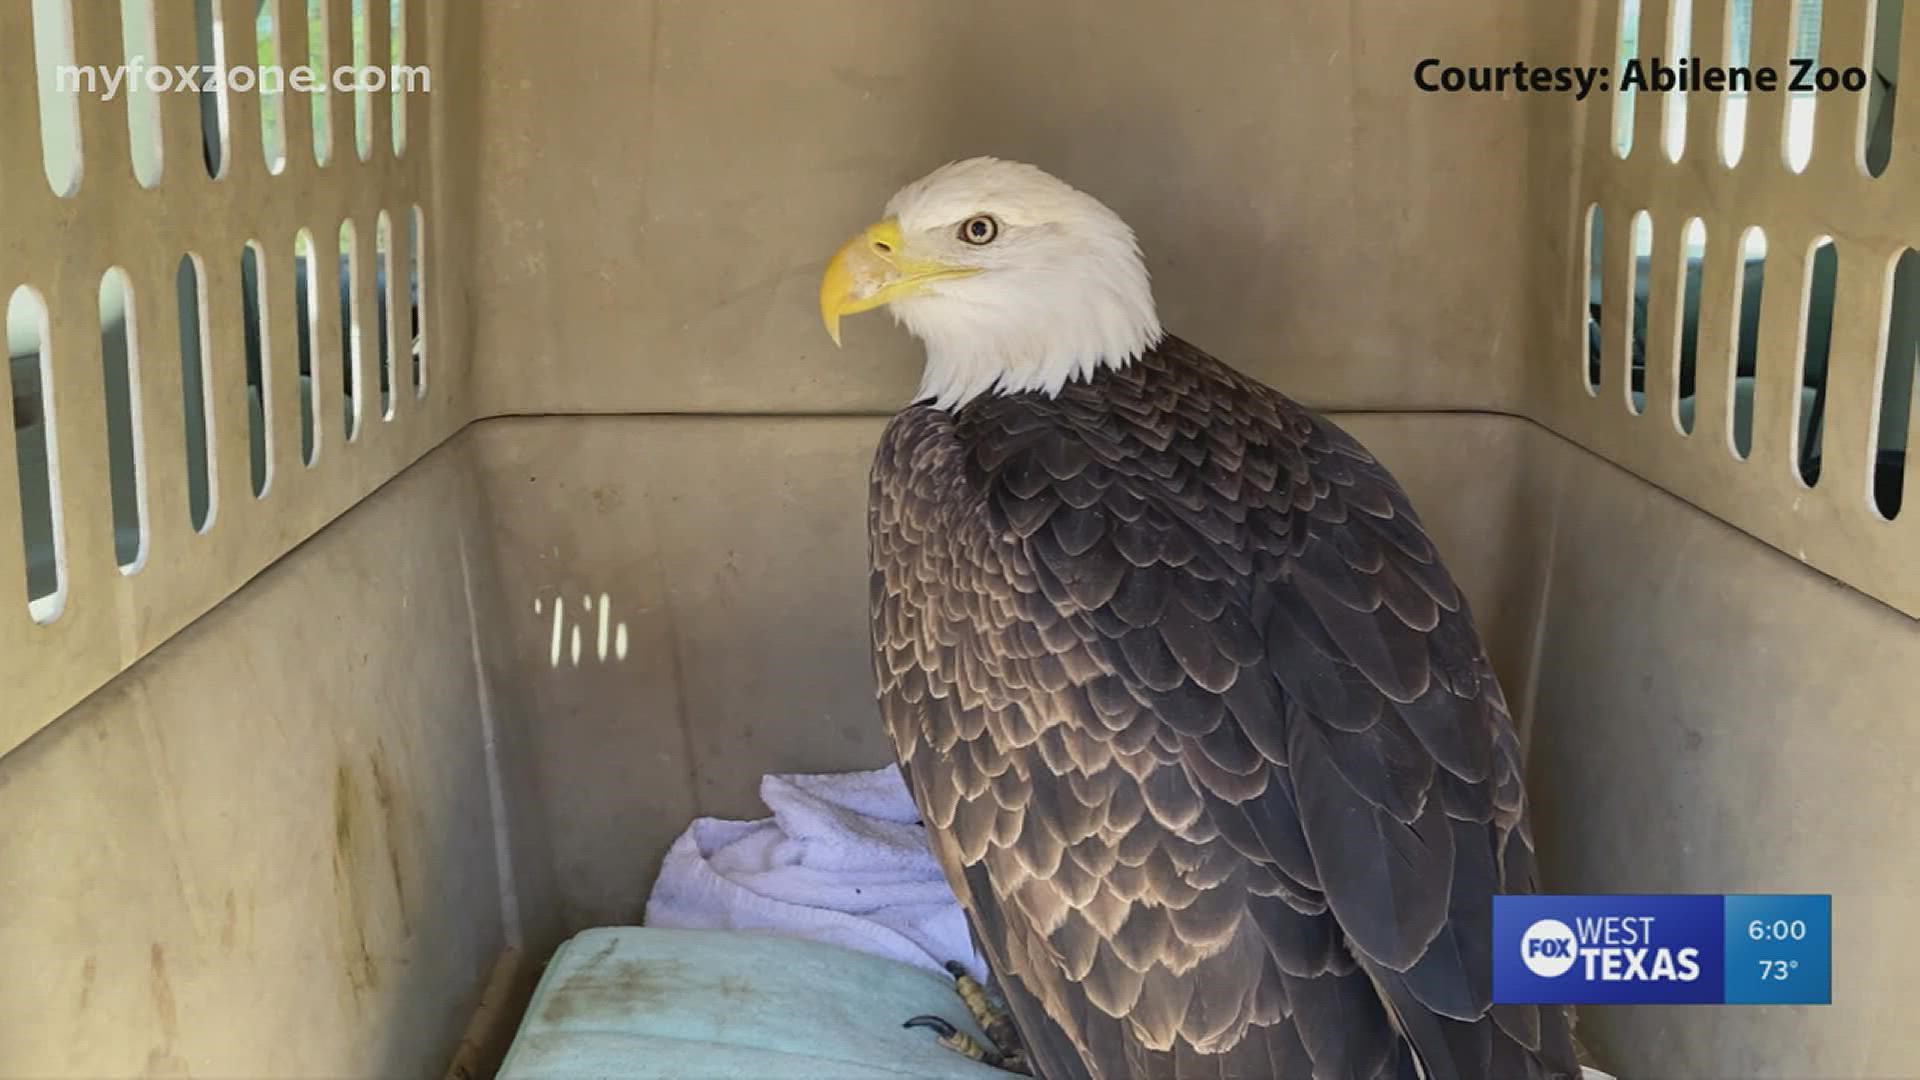 It took a village to help an injured bald eagle get back to its natural habitat.